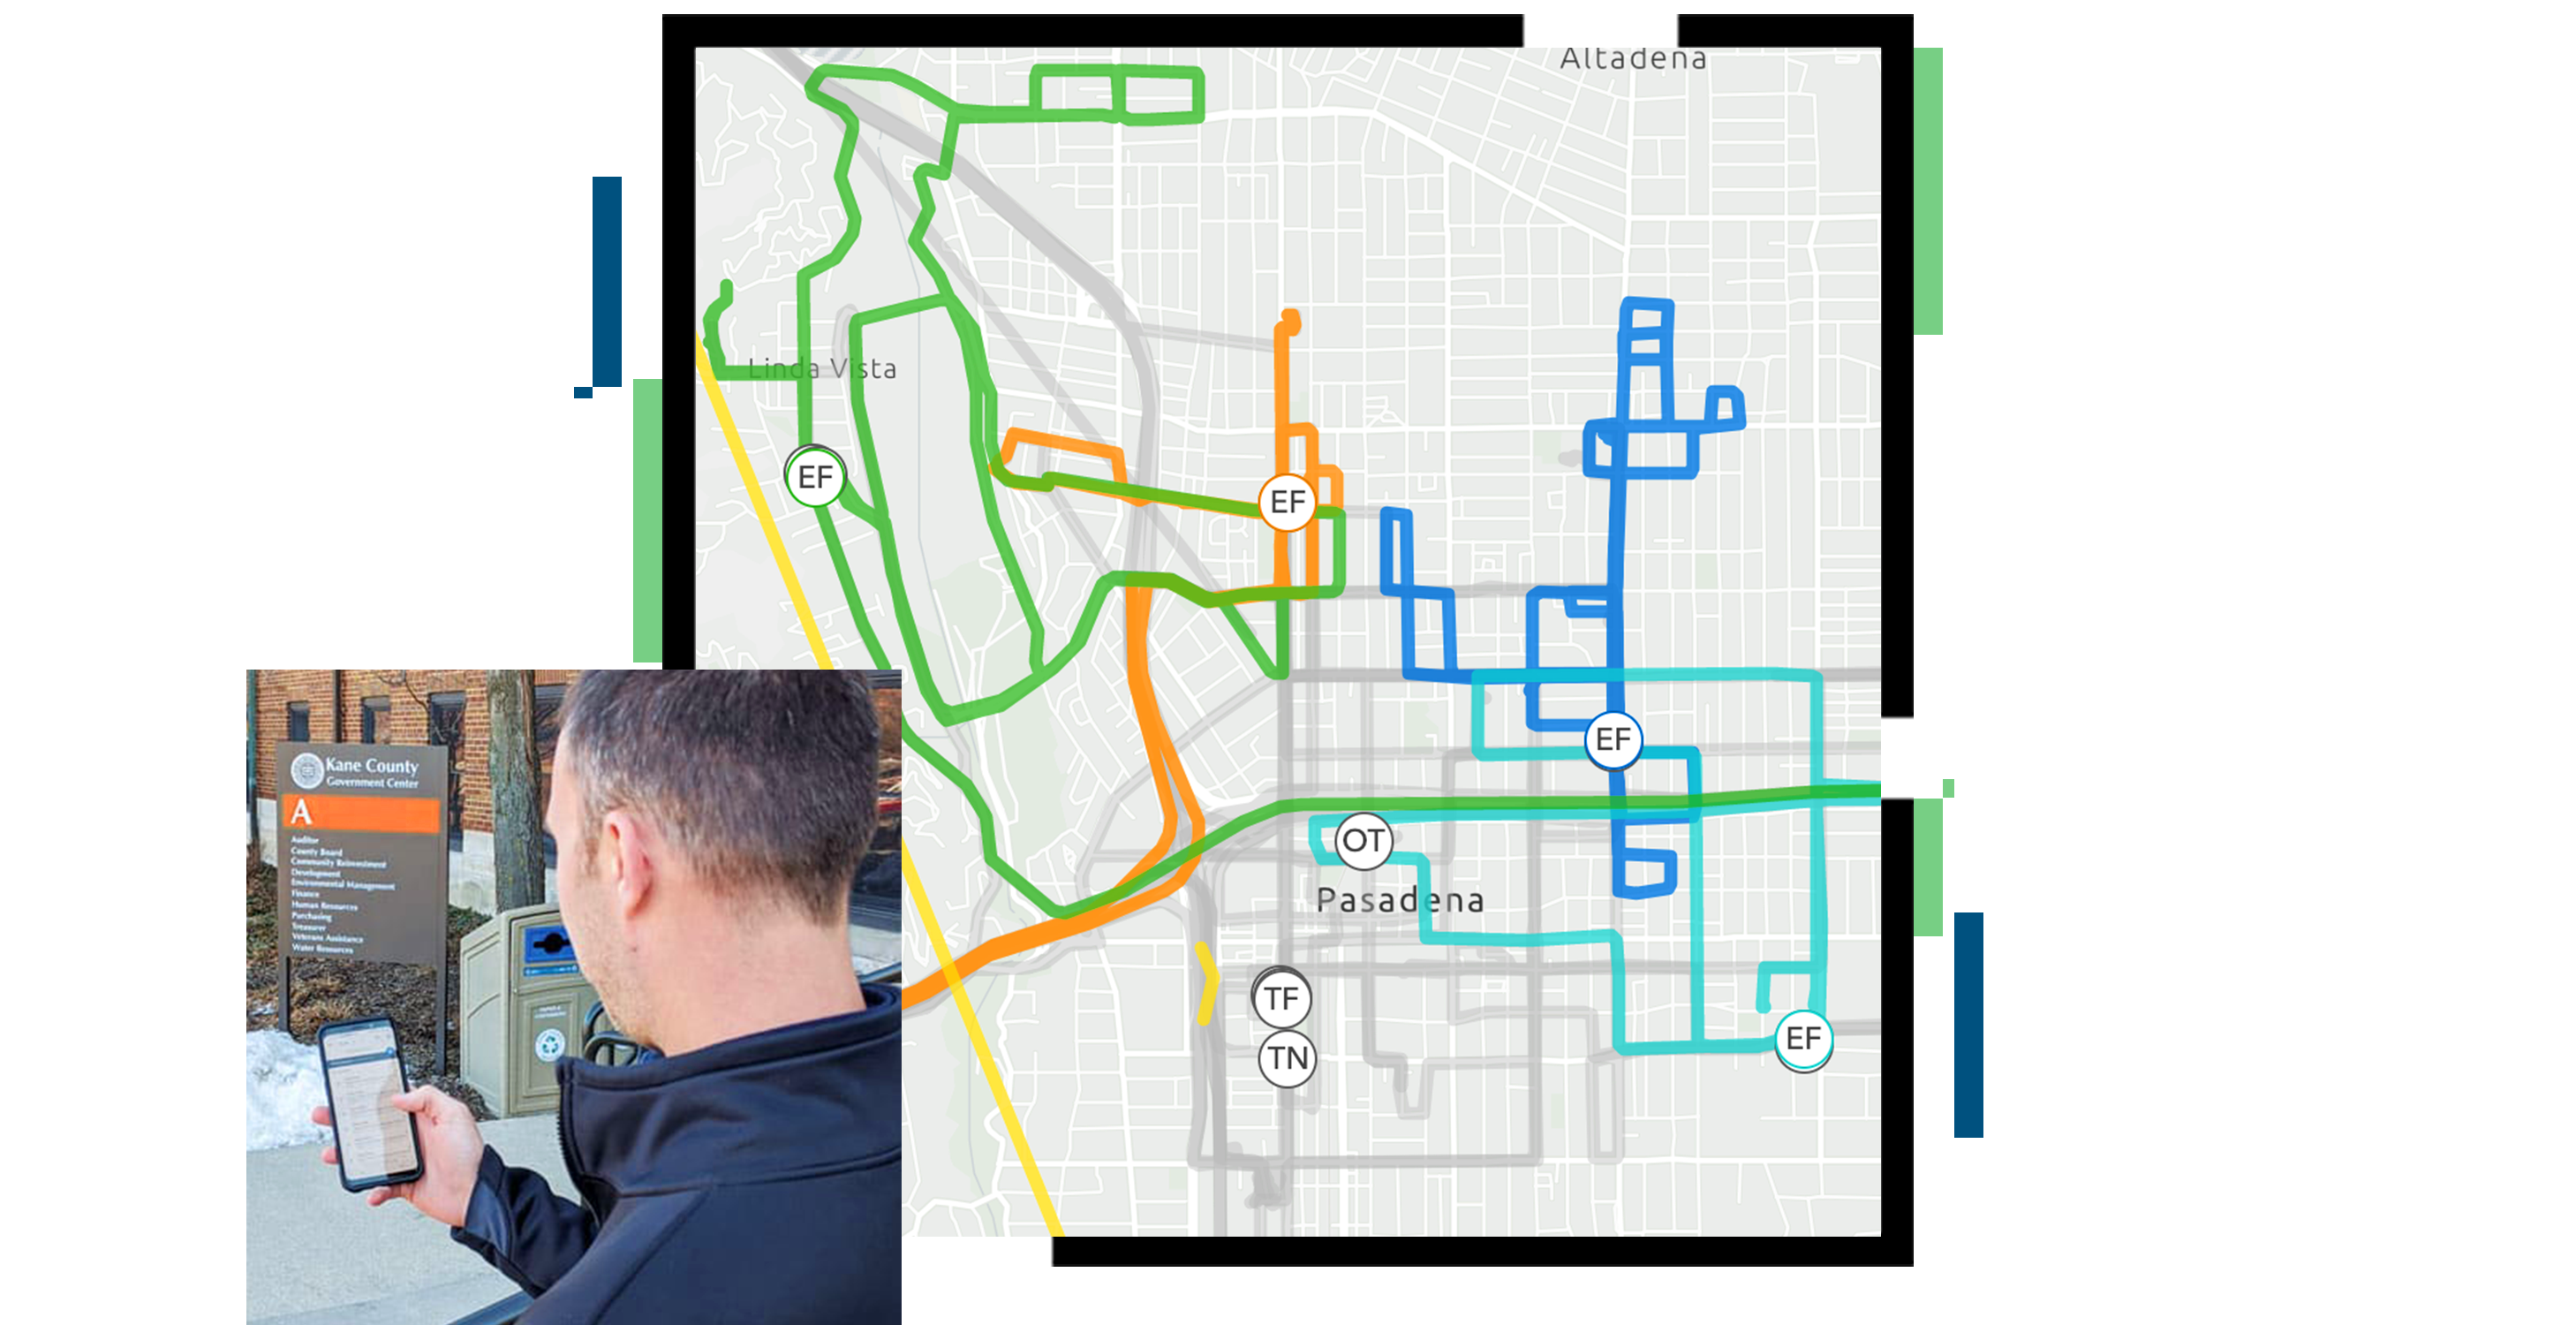 A city street map with routes shown in green, blue, and orange on a gray background, overlaid with a photo of a person on a city street using a mobile phone to view a list of polling sites